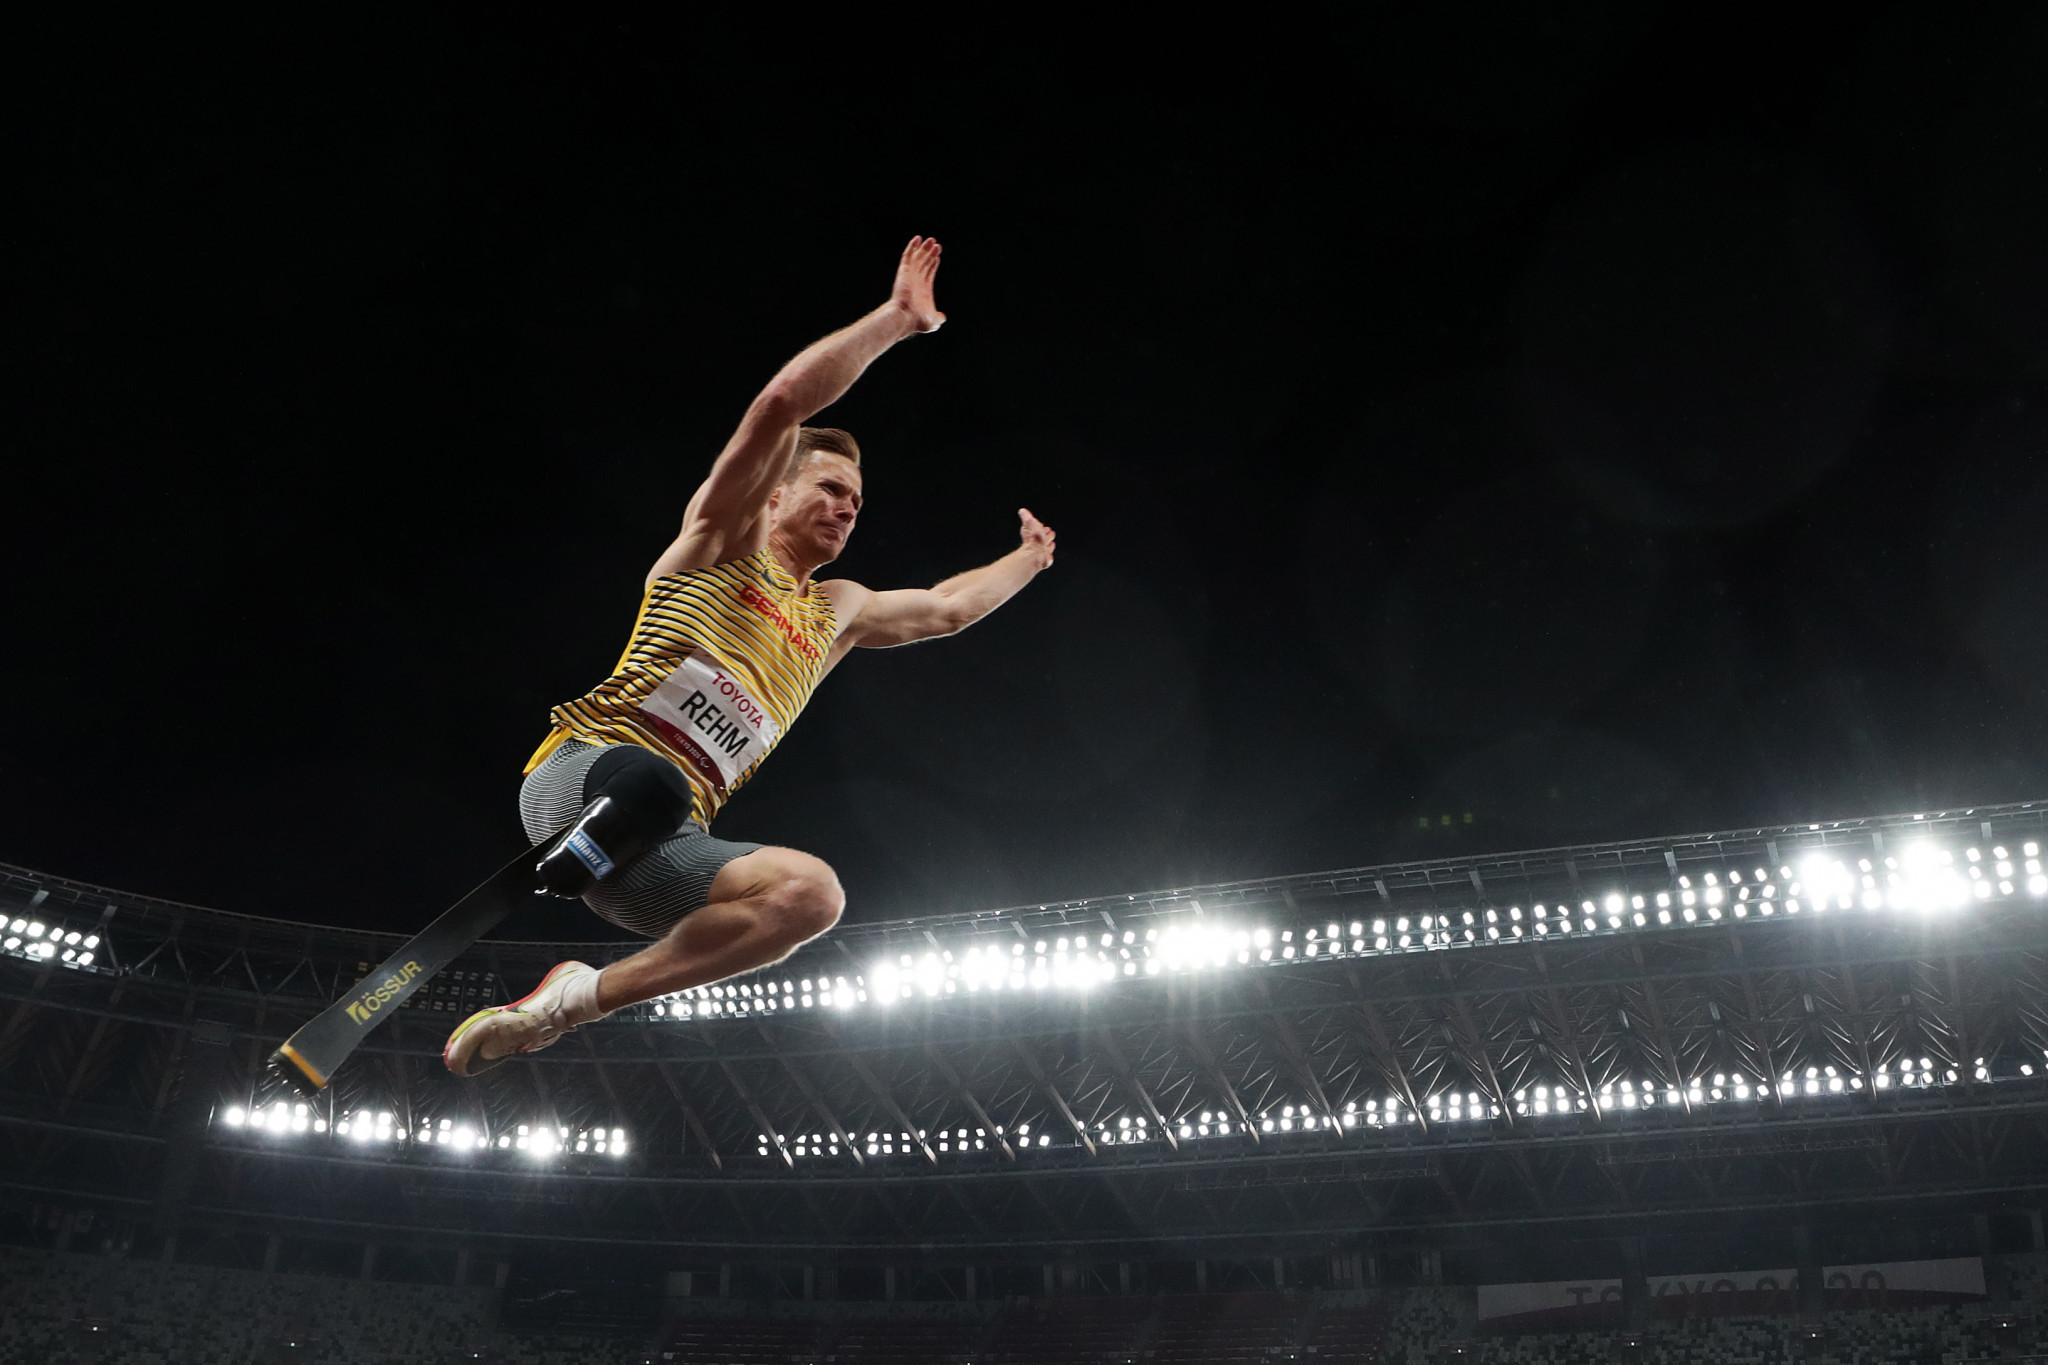 Markus Rehm broke the men's long jump T64 world record with 8.62m at the European Championships in June ©Getty Images